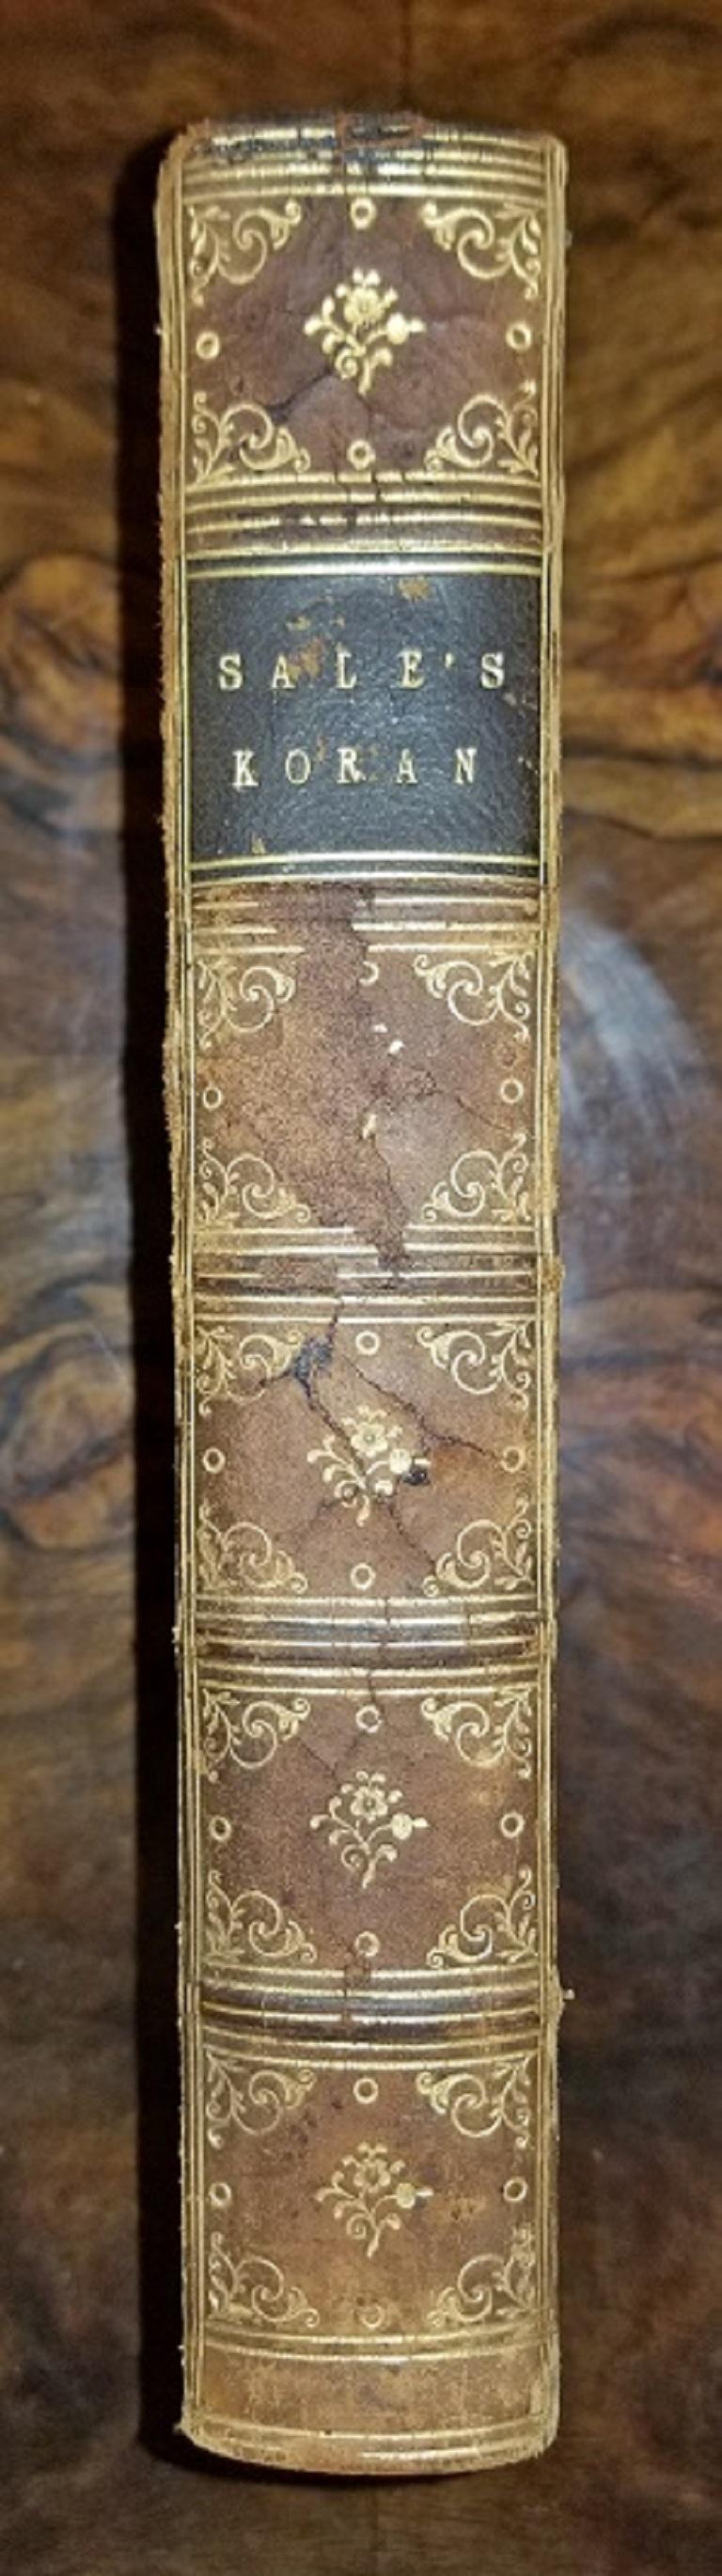 The Koran The Alcoran of Mohammed by George Sale 1844 11